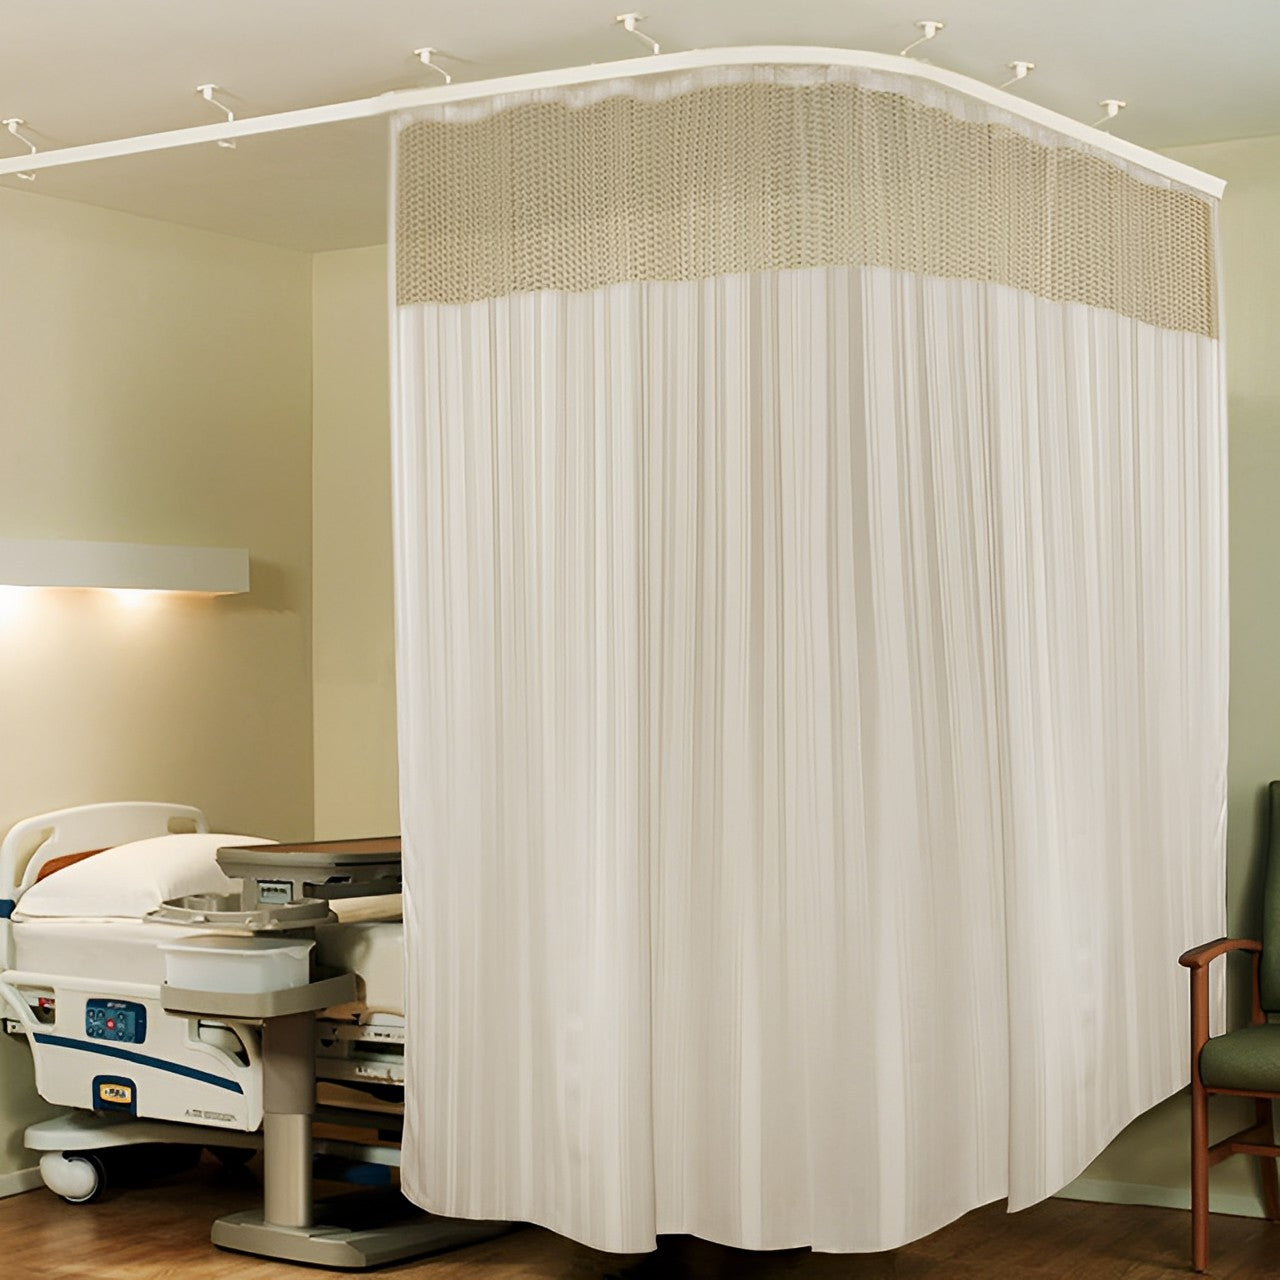 Hospital Partition Curtains, Clinic Curtains Size 10 FT W x 7 ft H, Channel Curtains with Net Fabric, 100% polyester 20 Rustfree Metal Eyelets 20 Plastic Hook, Cream, Stripes Design (10x7 FT, Pk of 1)